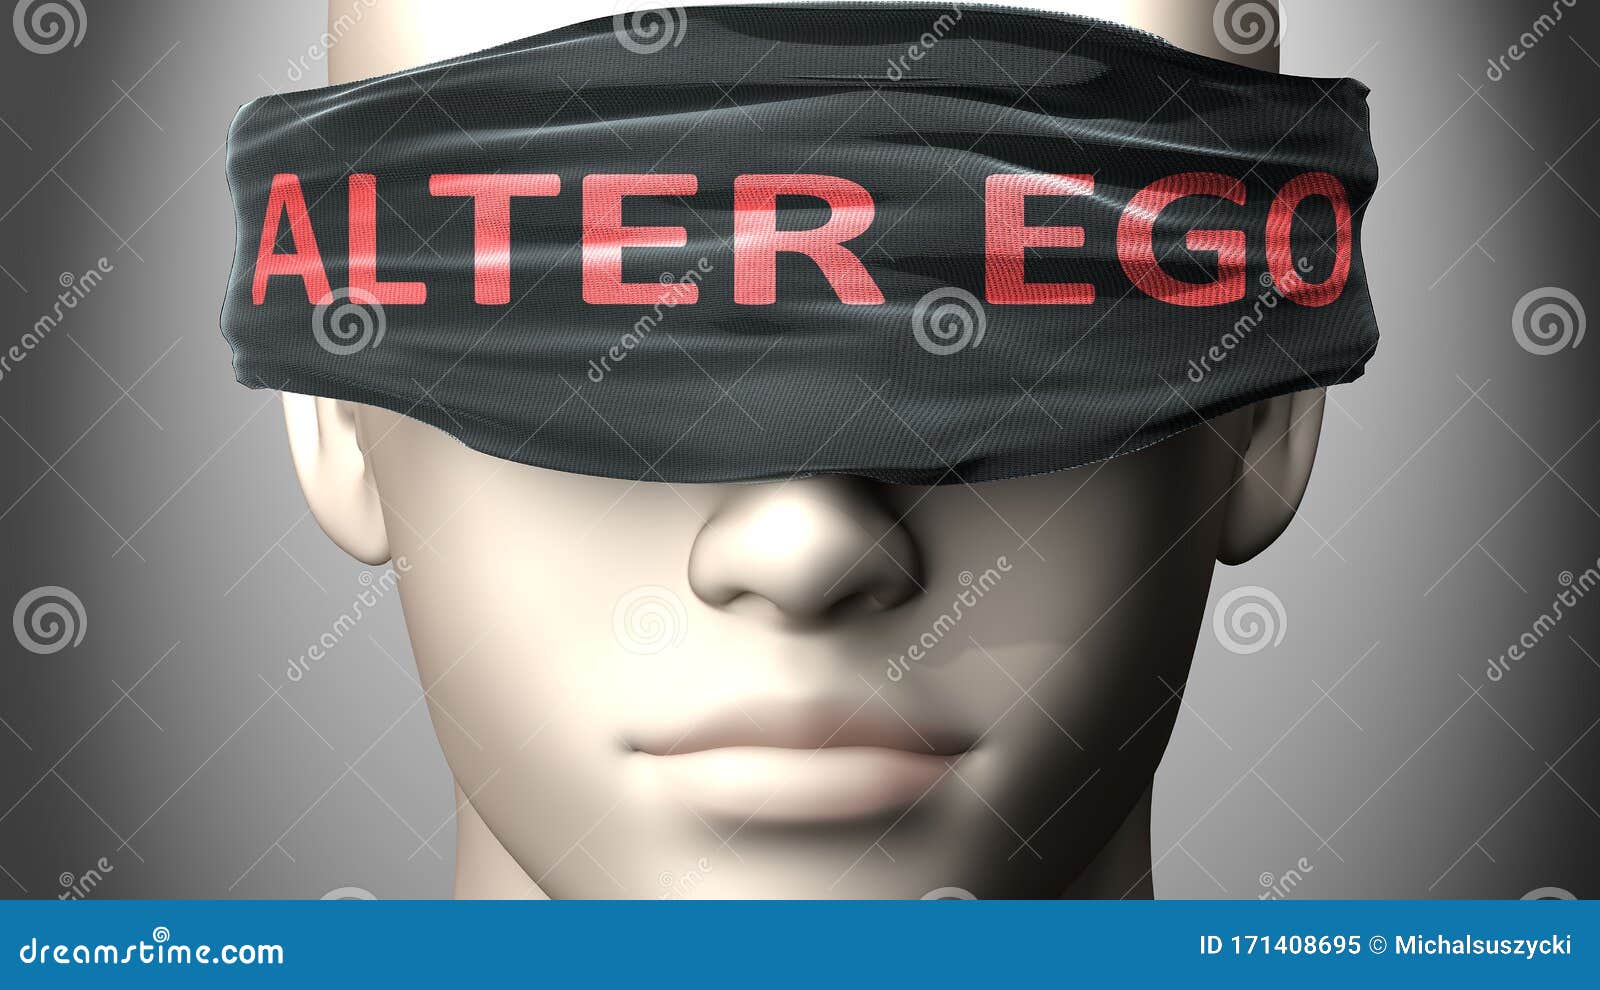 Alter Ego Can Make Things Harder To See or Makes Us Blind To the